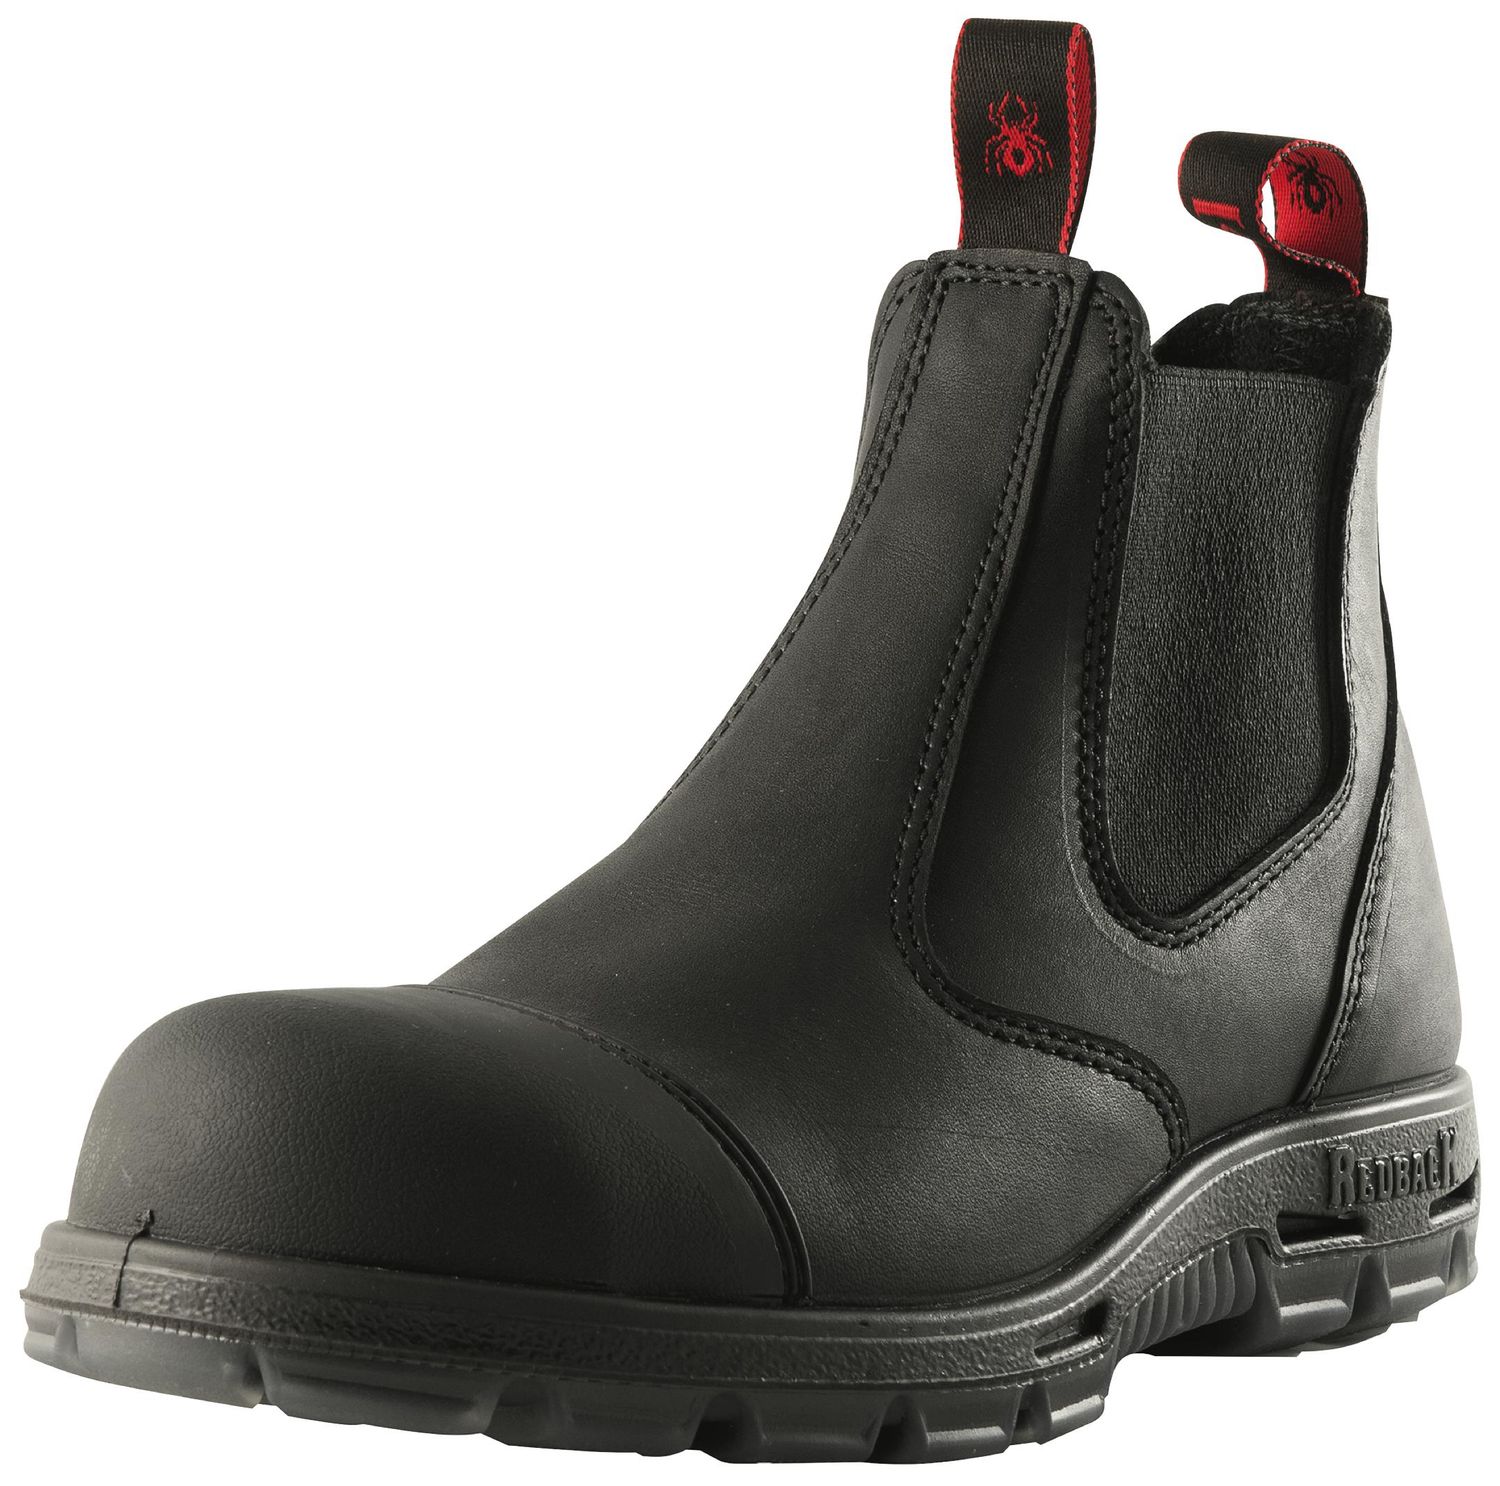 RBBUSBBKSC8 - Easy Escape HD Steel Toe Boot with Scuff Cap (Size 9)